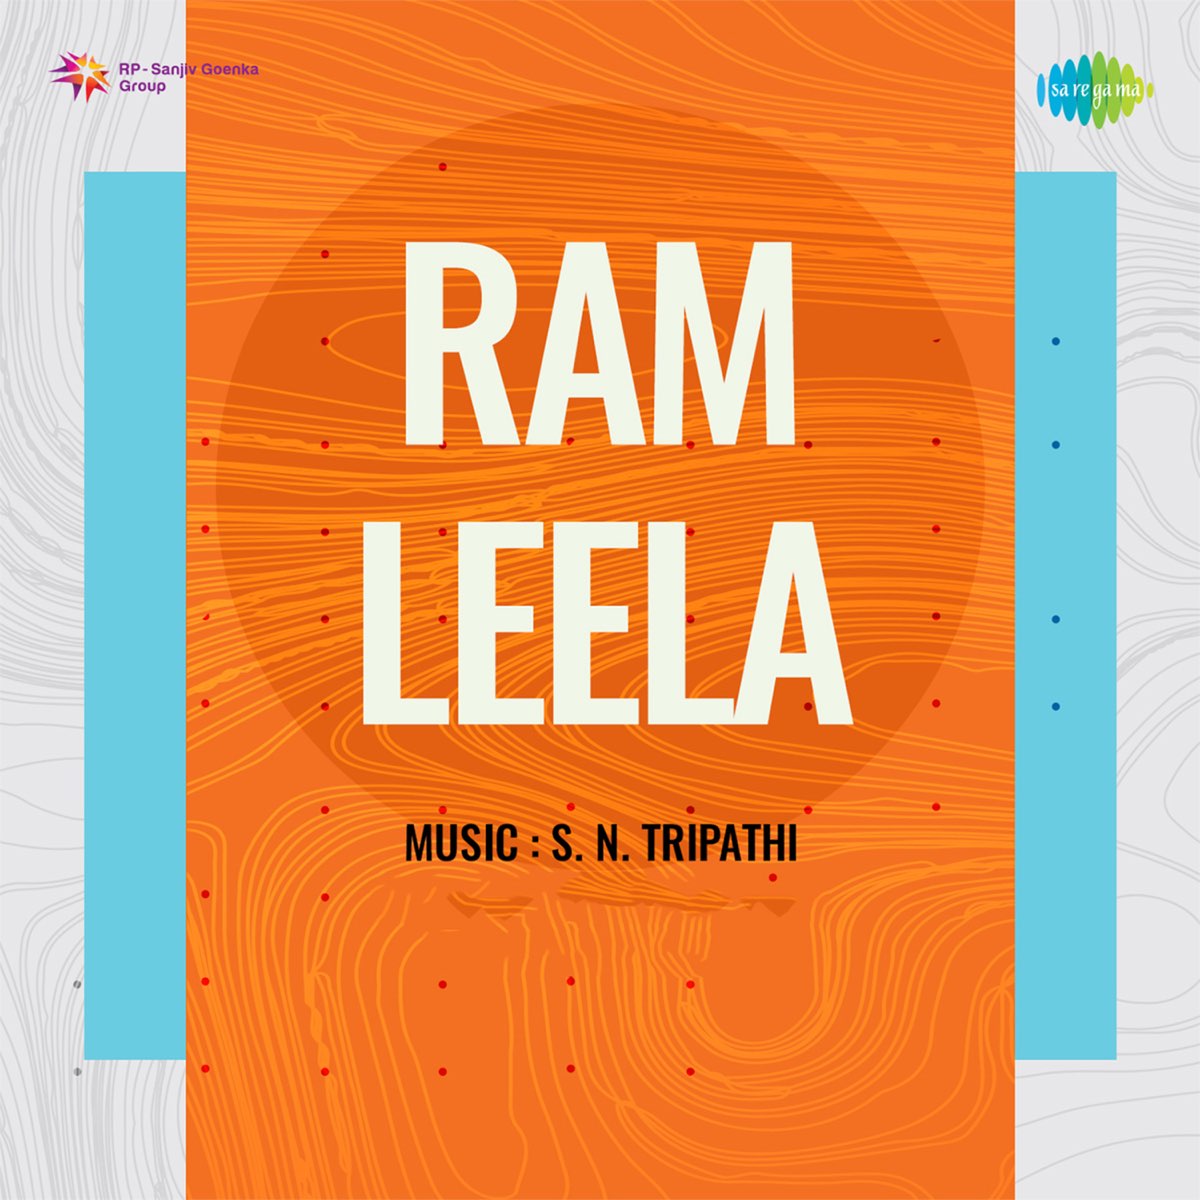 Ram Leela (Original Motion Picture Soundtrack) - EP by S . N . Tripathi on  Apple Music